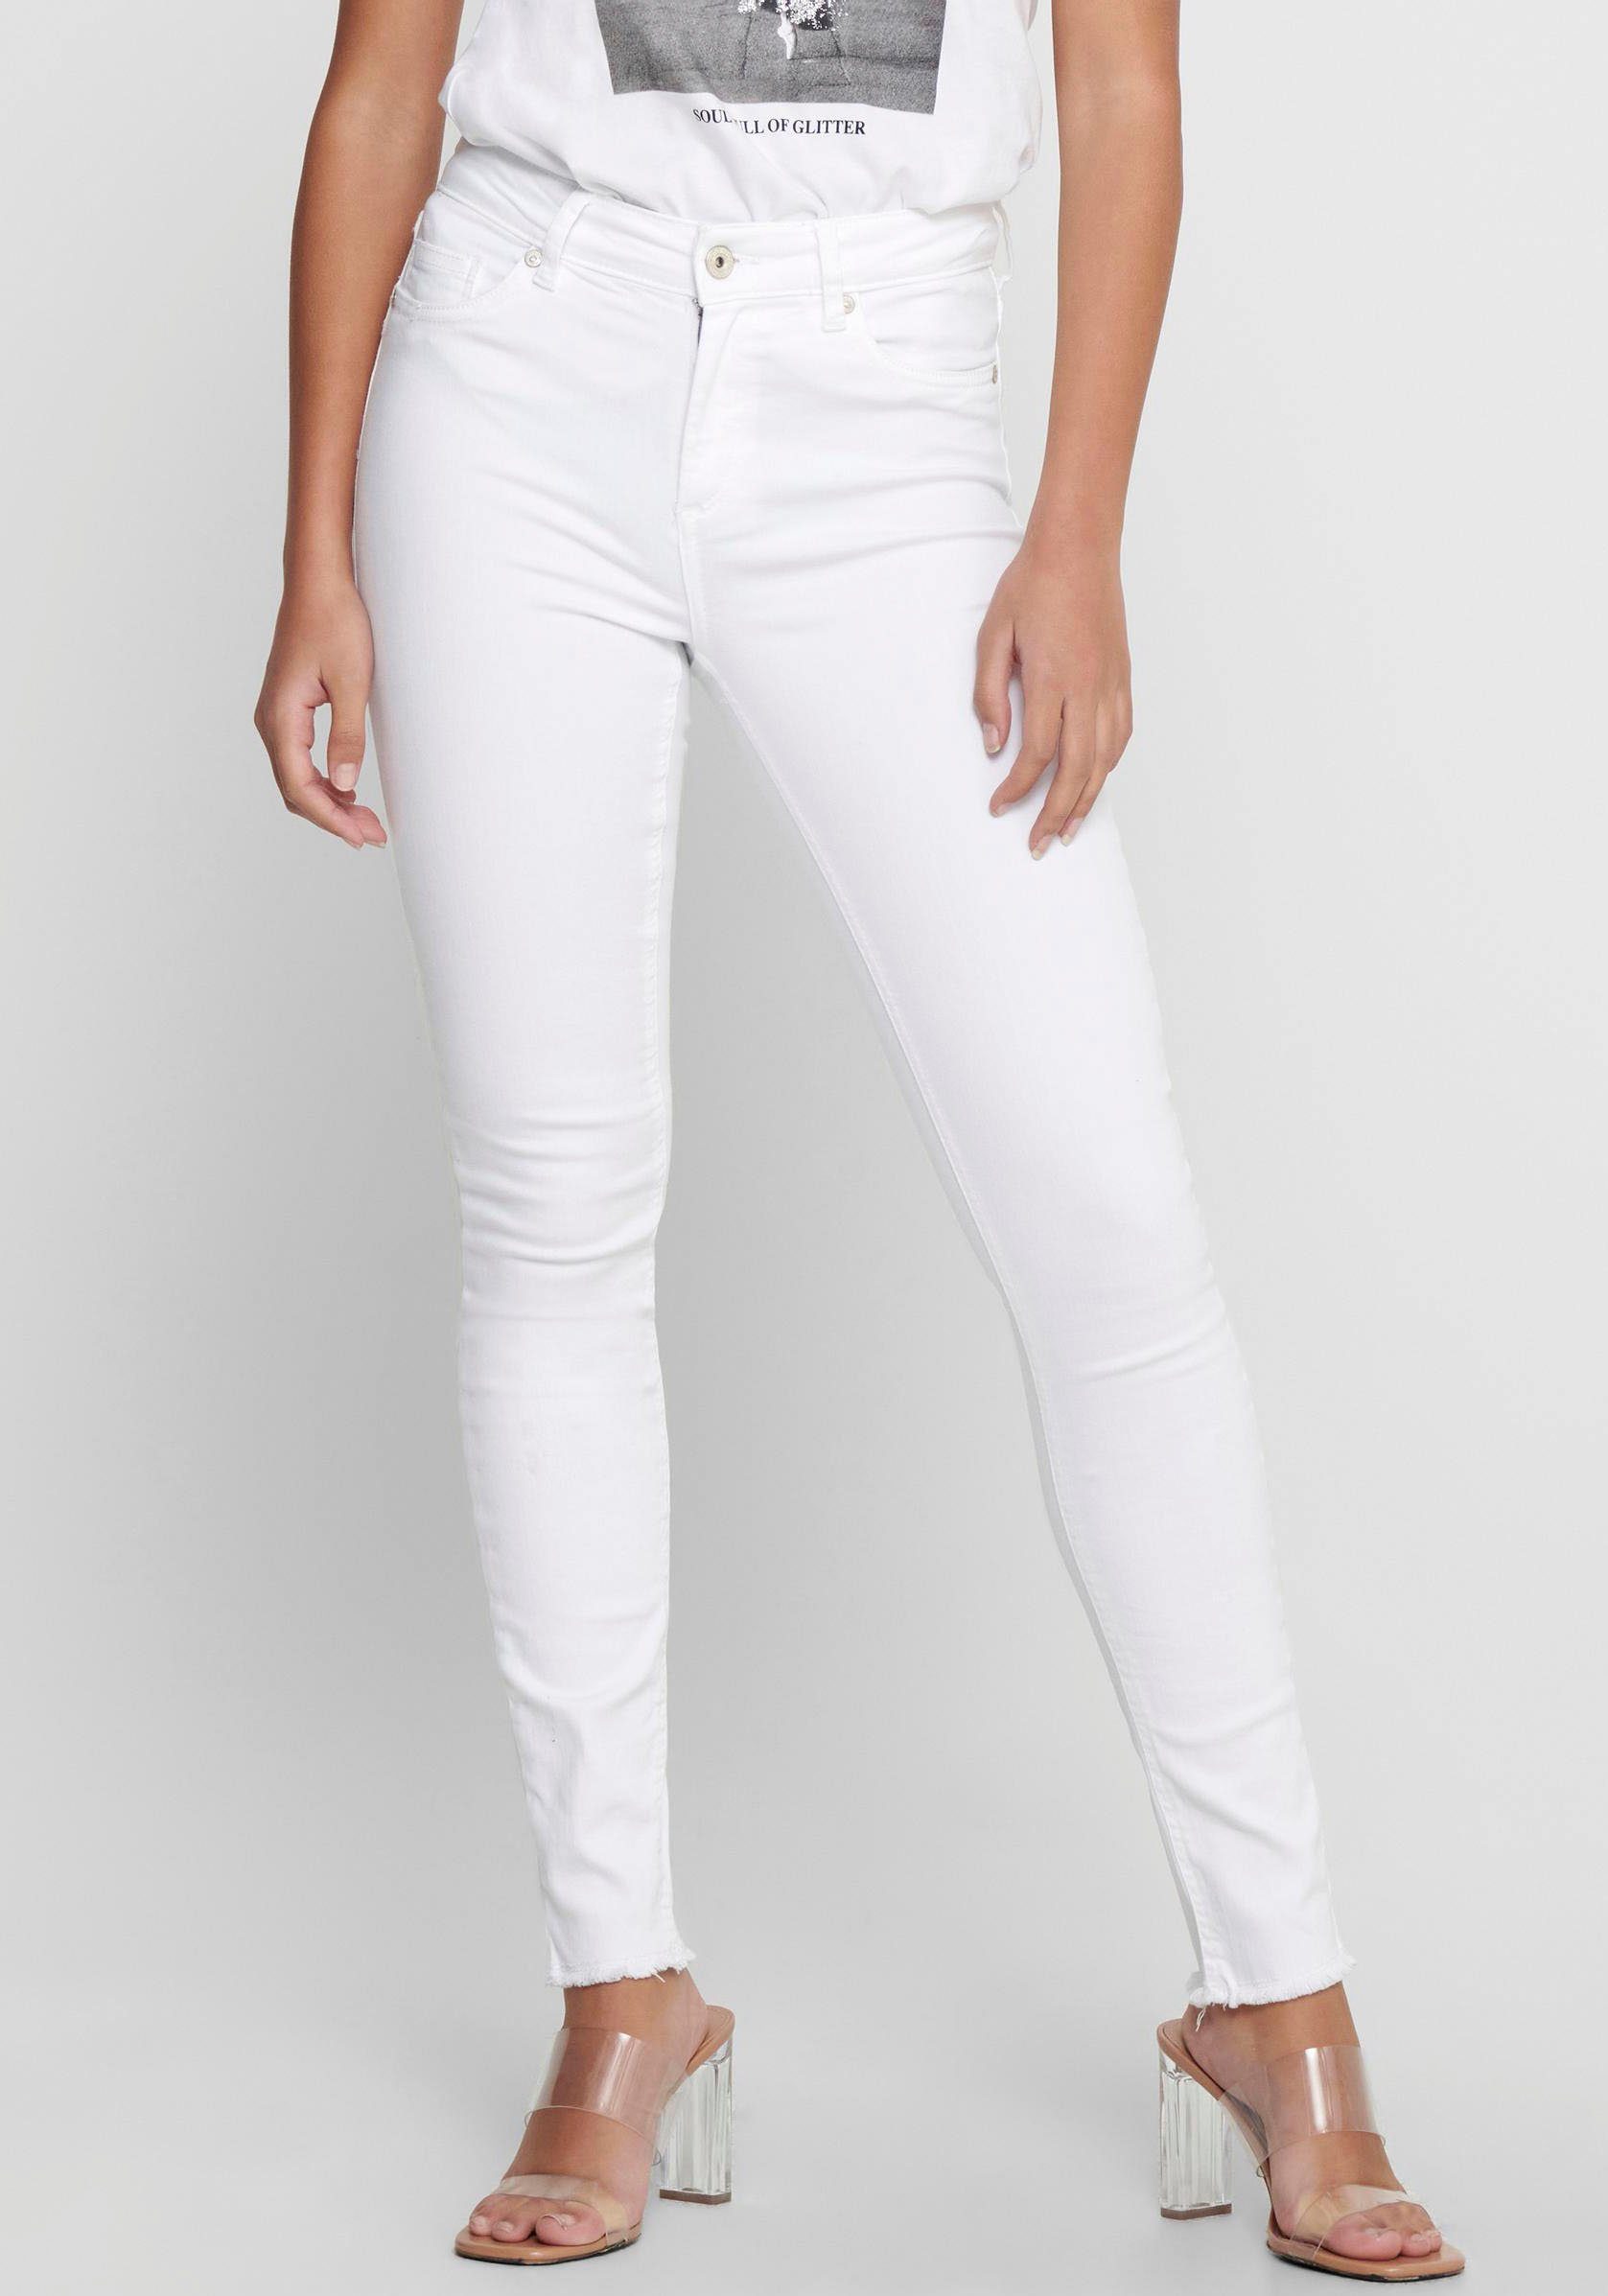 Only-Skinny jeans onlBlush in wit